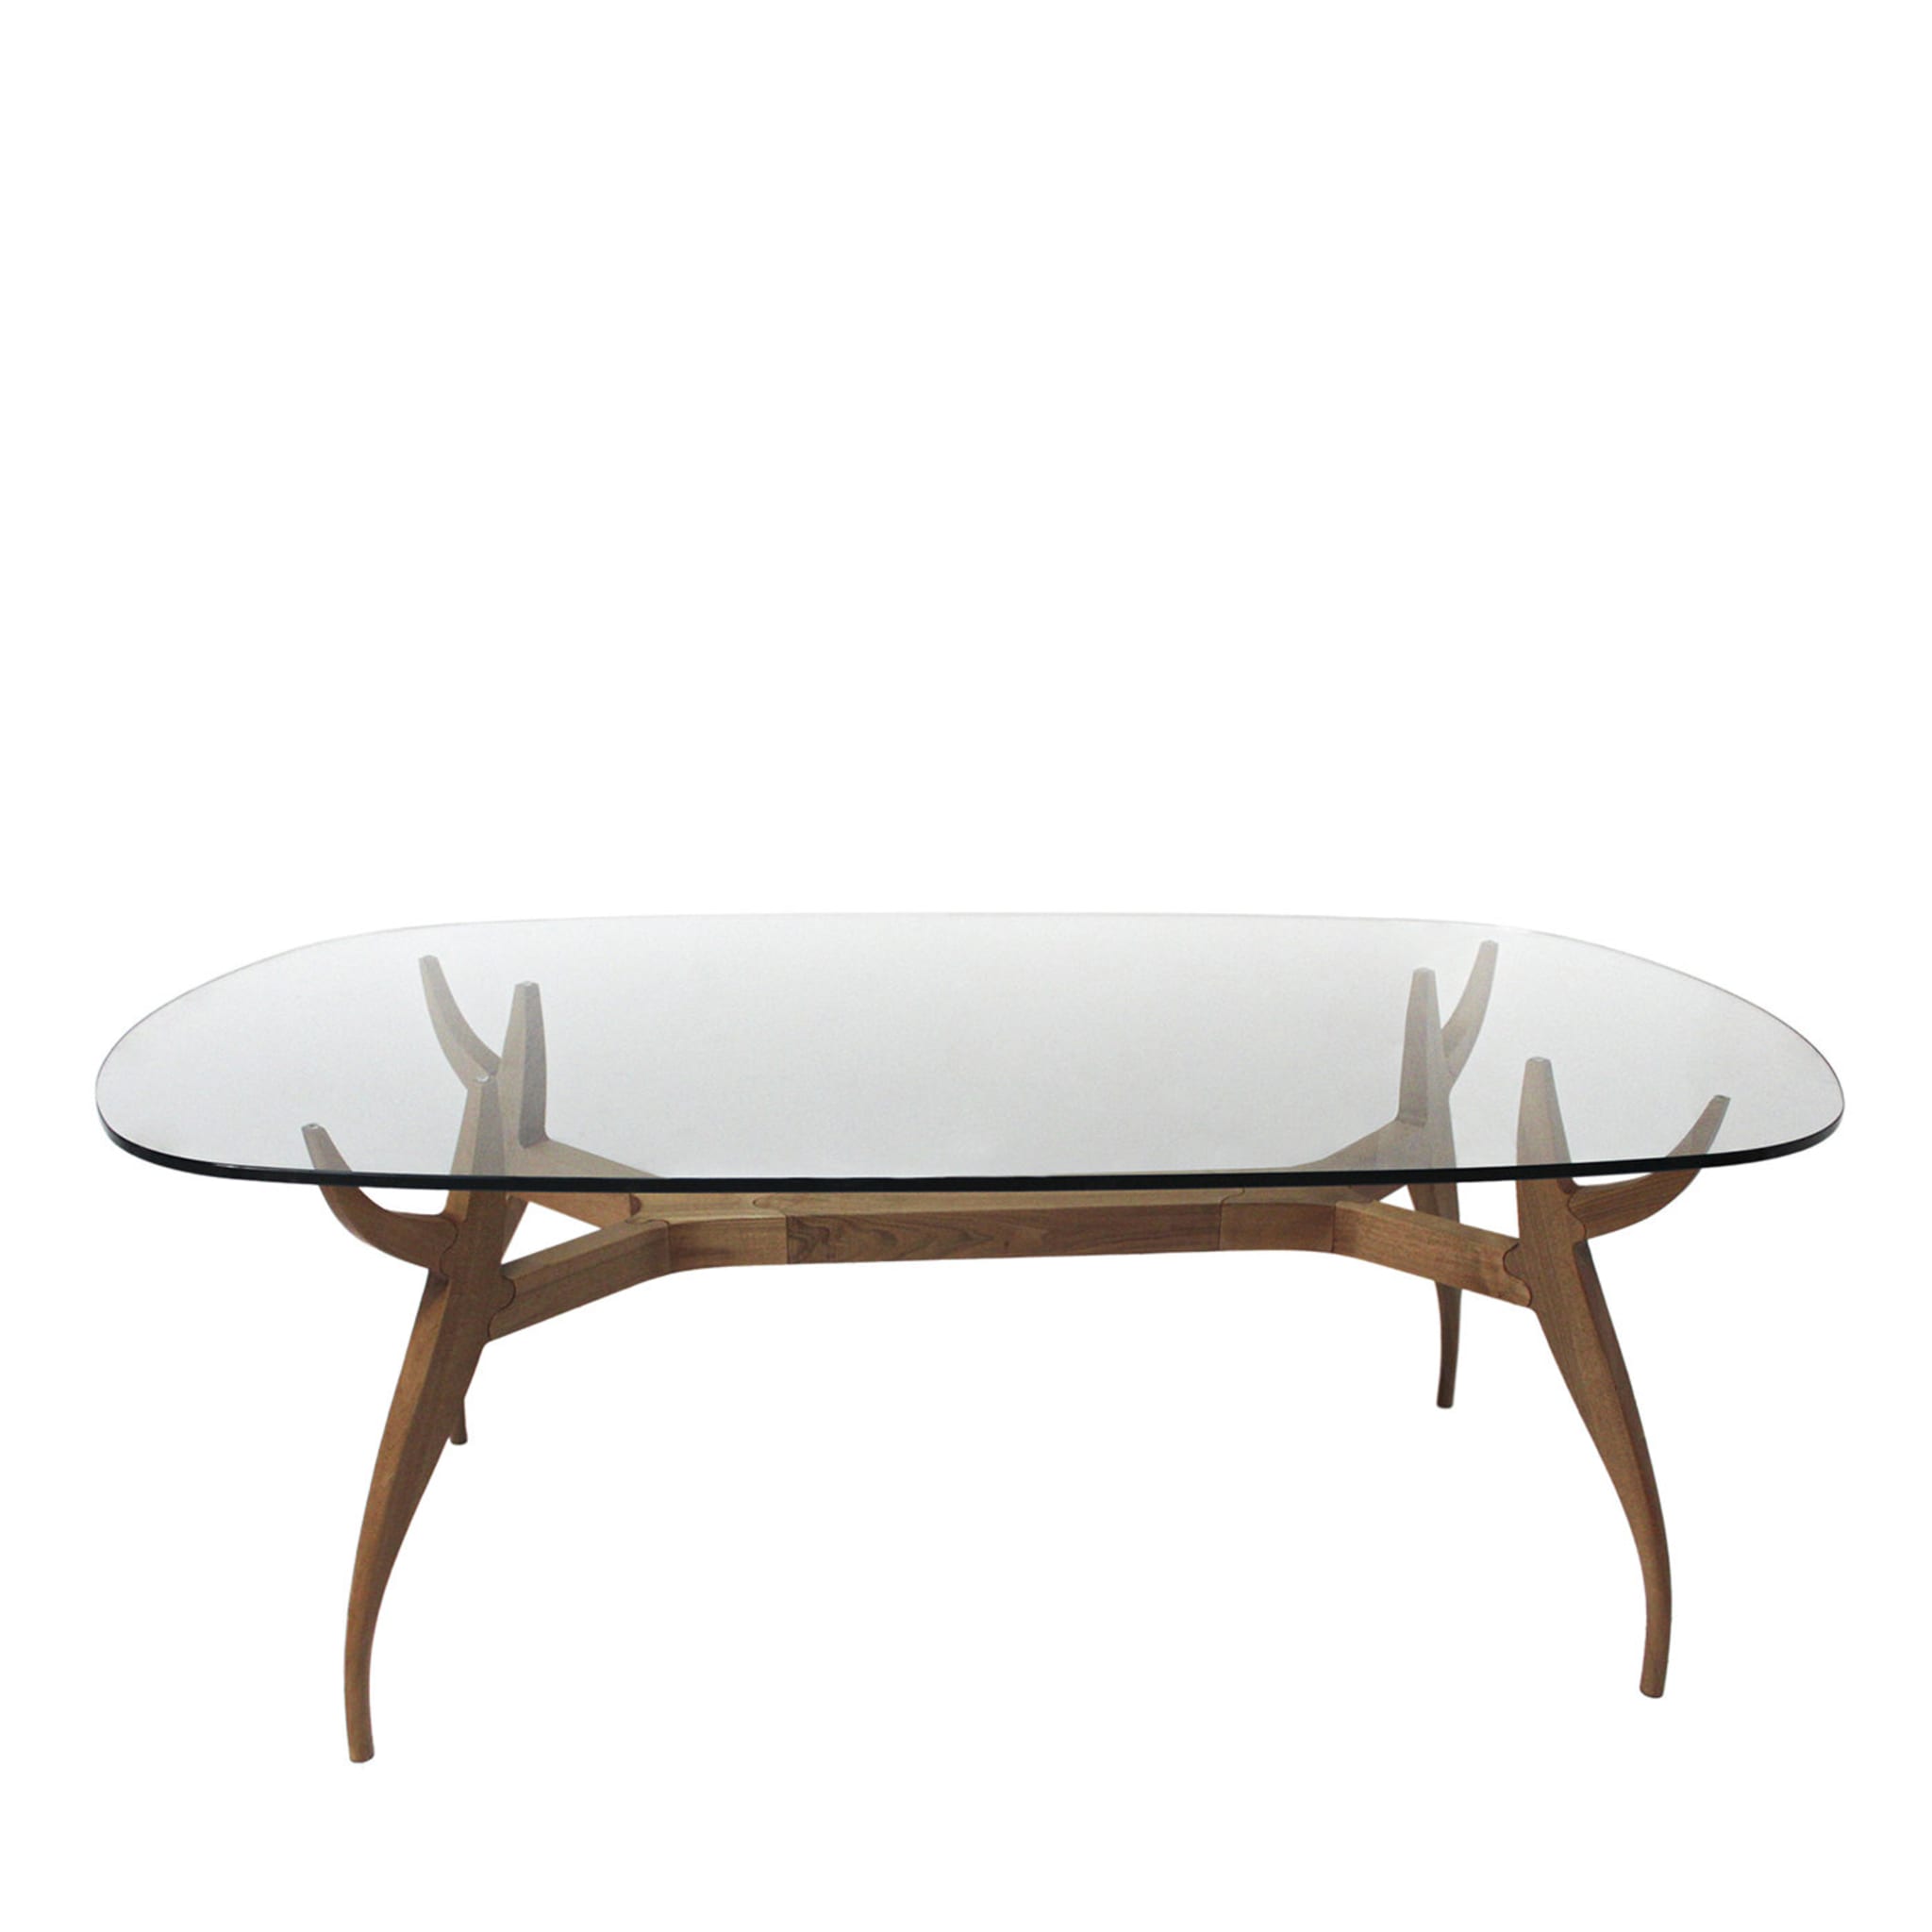 Stag Dining Table By Nigel Coates - Main view